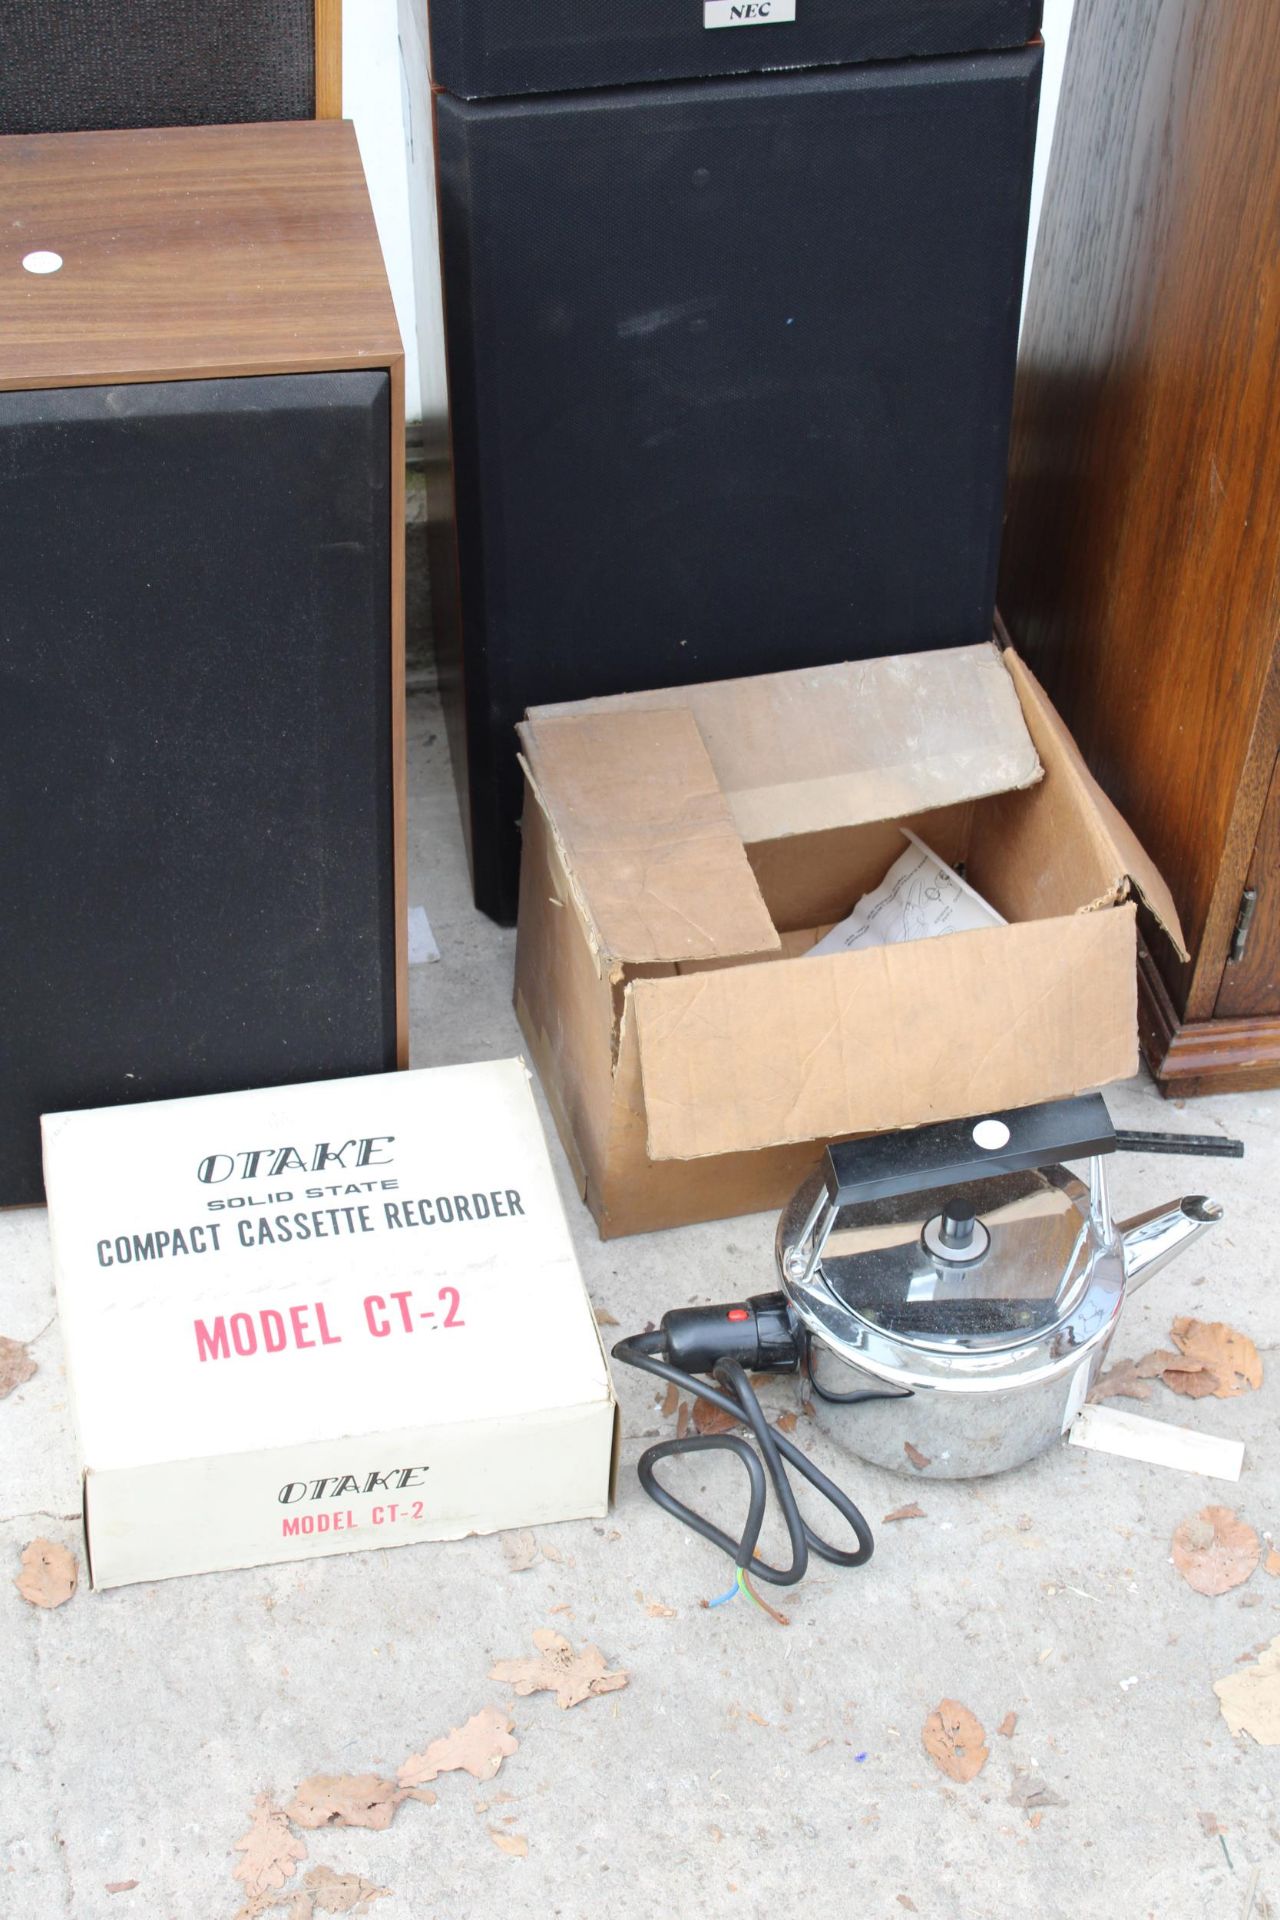 VARIOUS ITEMS TO INC;UDE FOUR LARGE SPEAKERS, A COMPACT CASSETTE RECORDER AND A KETTLE - Bild 2 aus 2